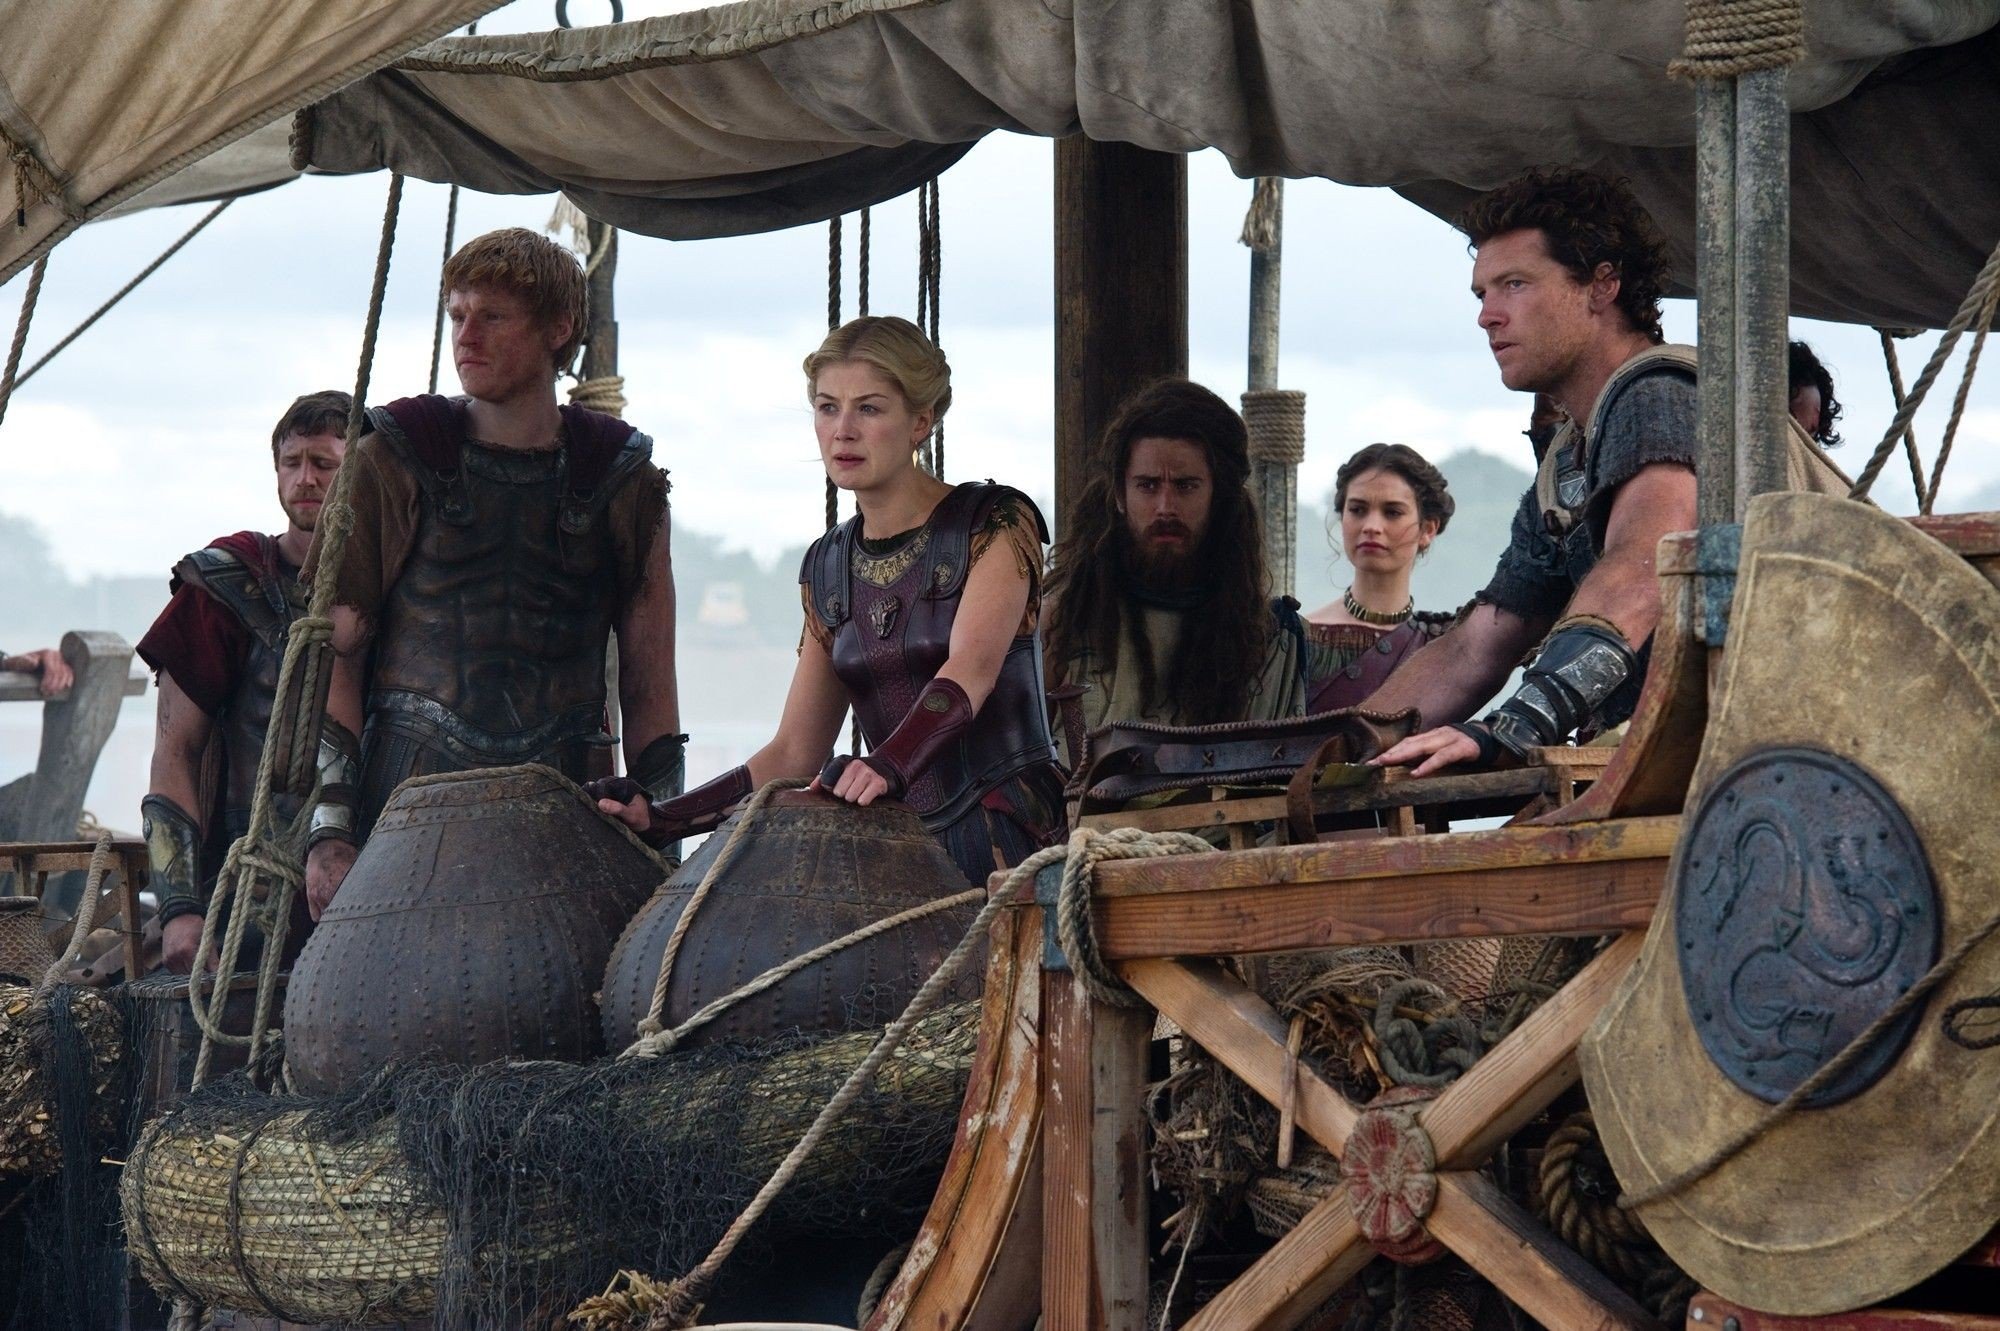 Rosamund Pike, Toby Kebbell, Lily James and Sam Worthington in Warner Bros. Pictures' Wrath of the Titans (2012). Photo credit by Jay Maidment.